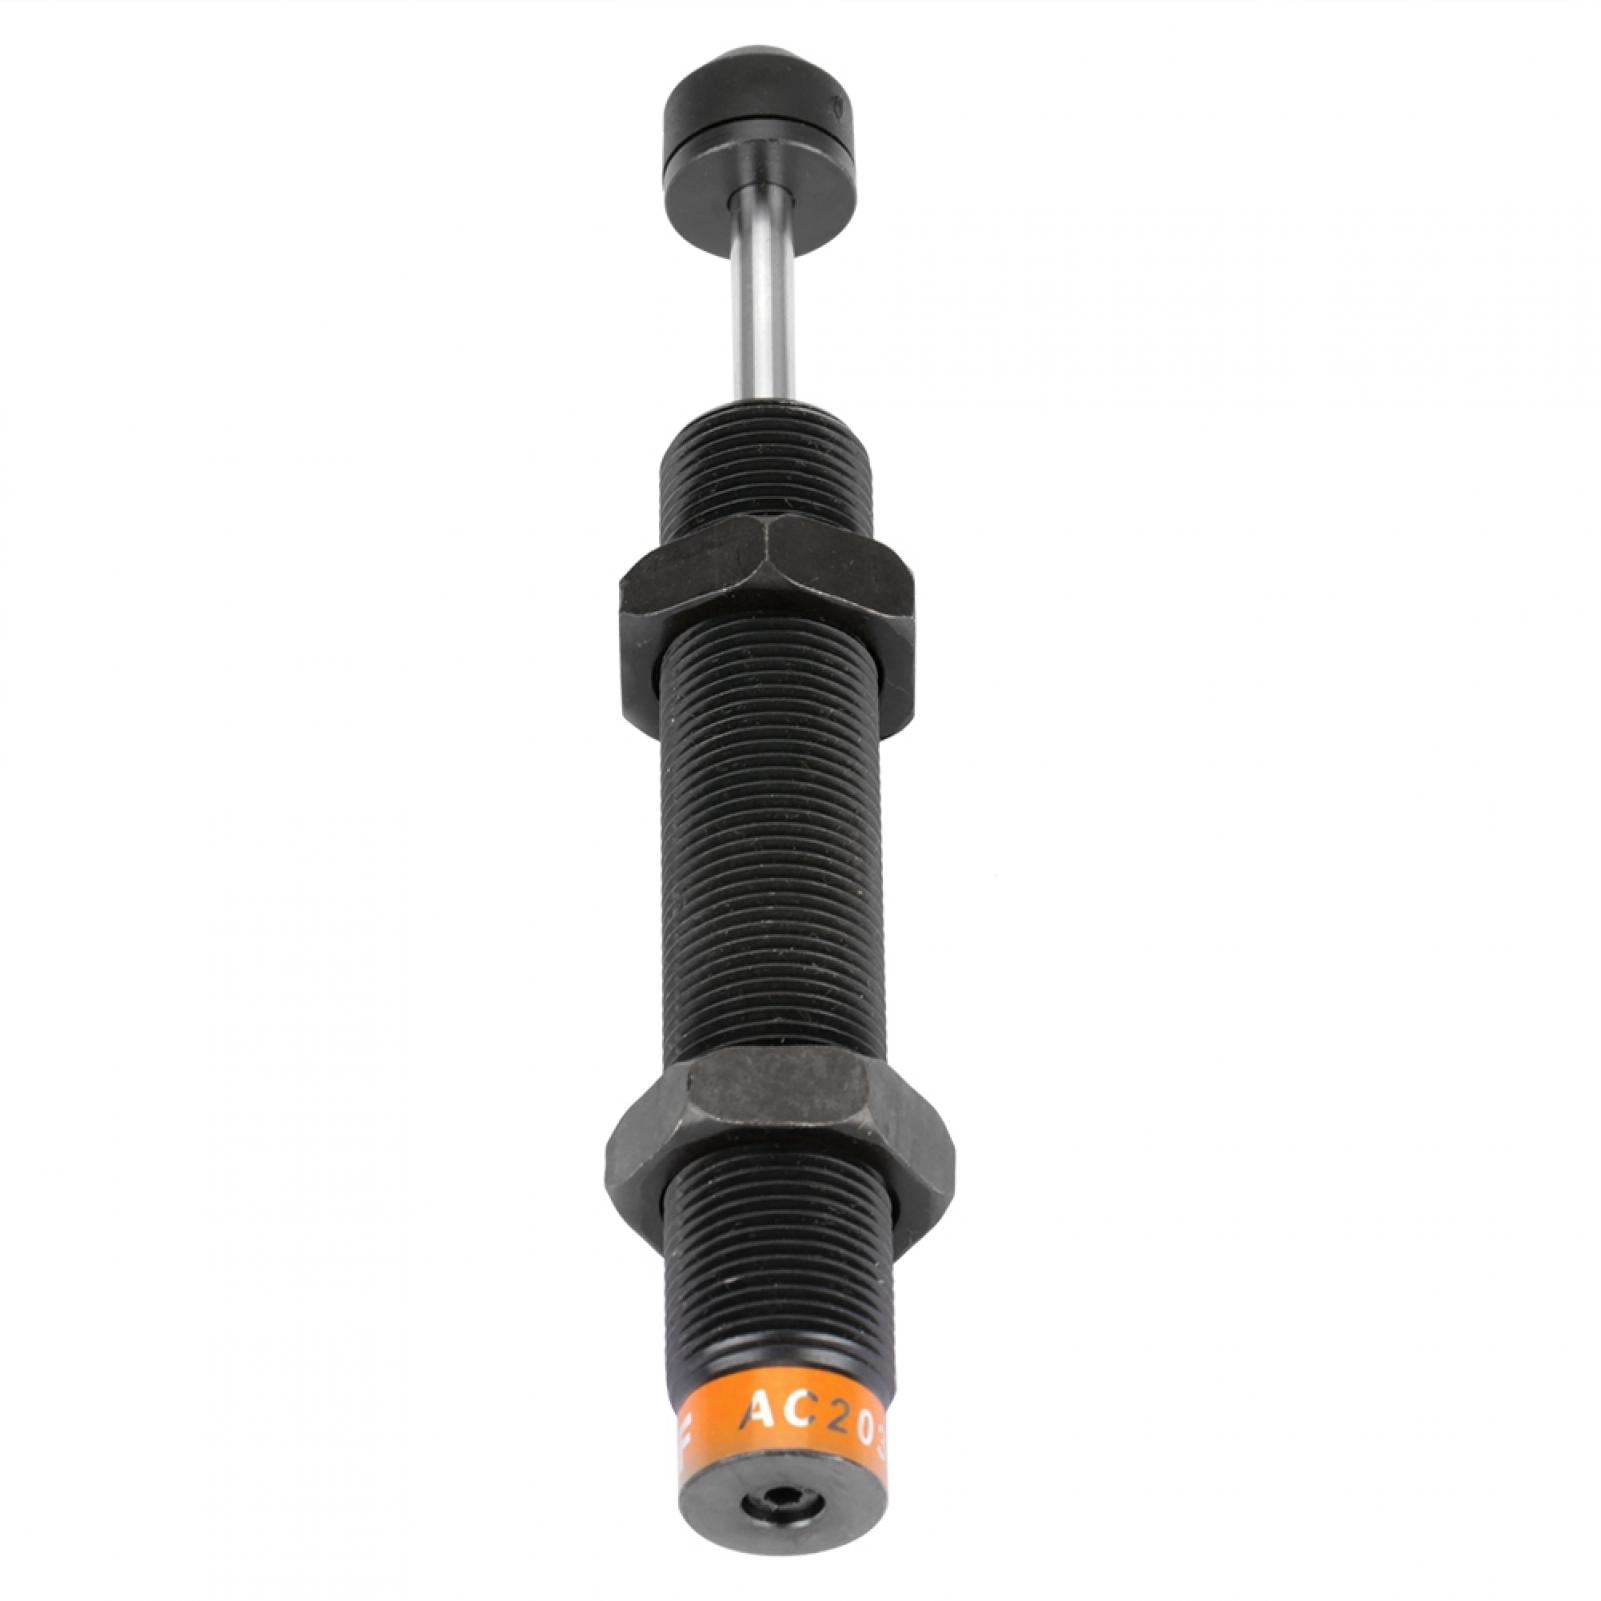 AC2050-2 M20 x 50mm Stroke Miniature Shock Absorber for Pneumatic Air Cylinder 